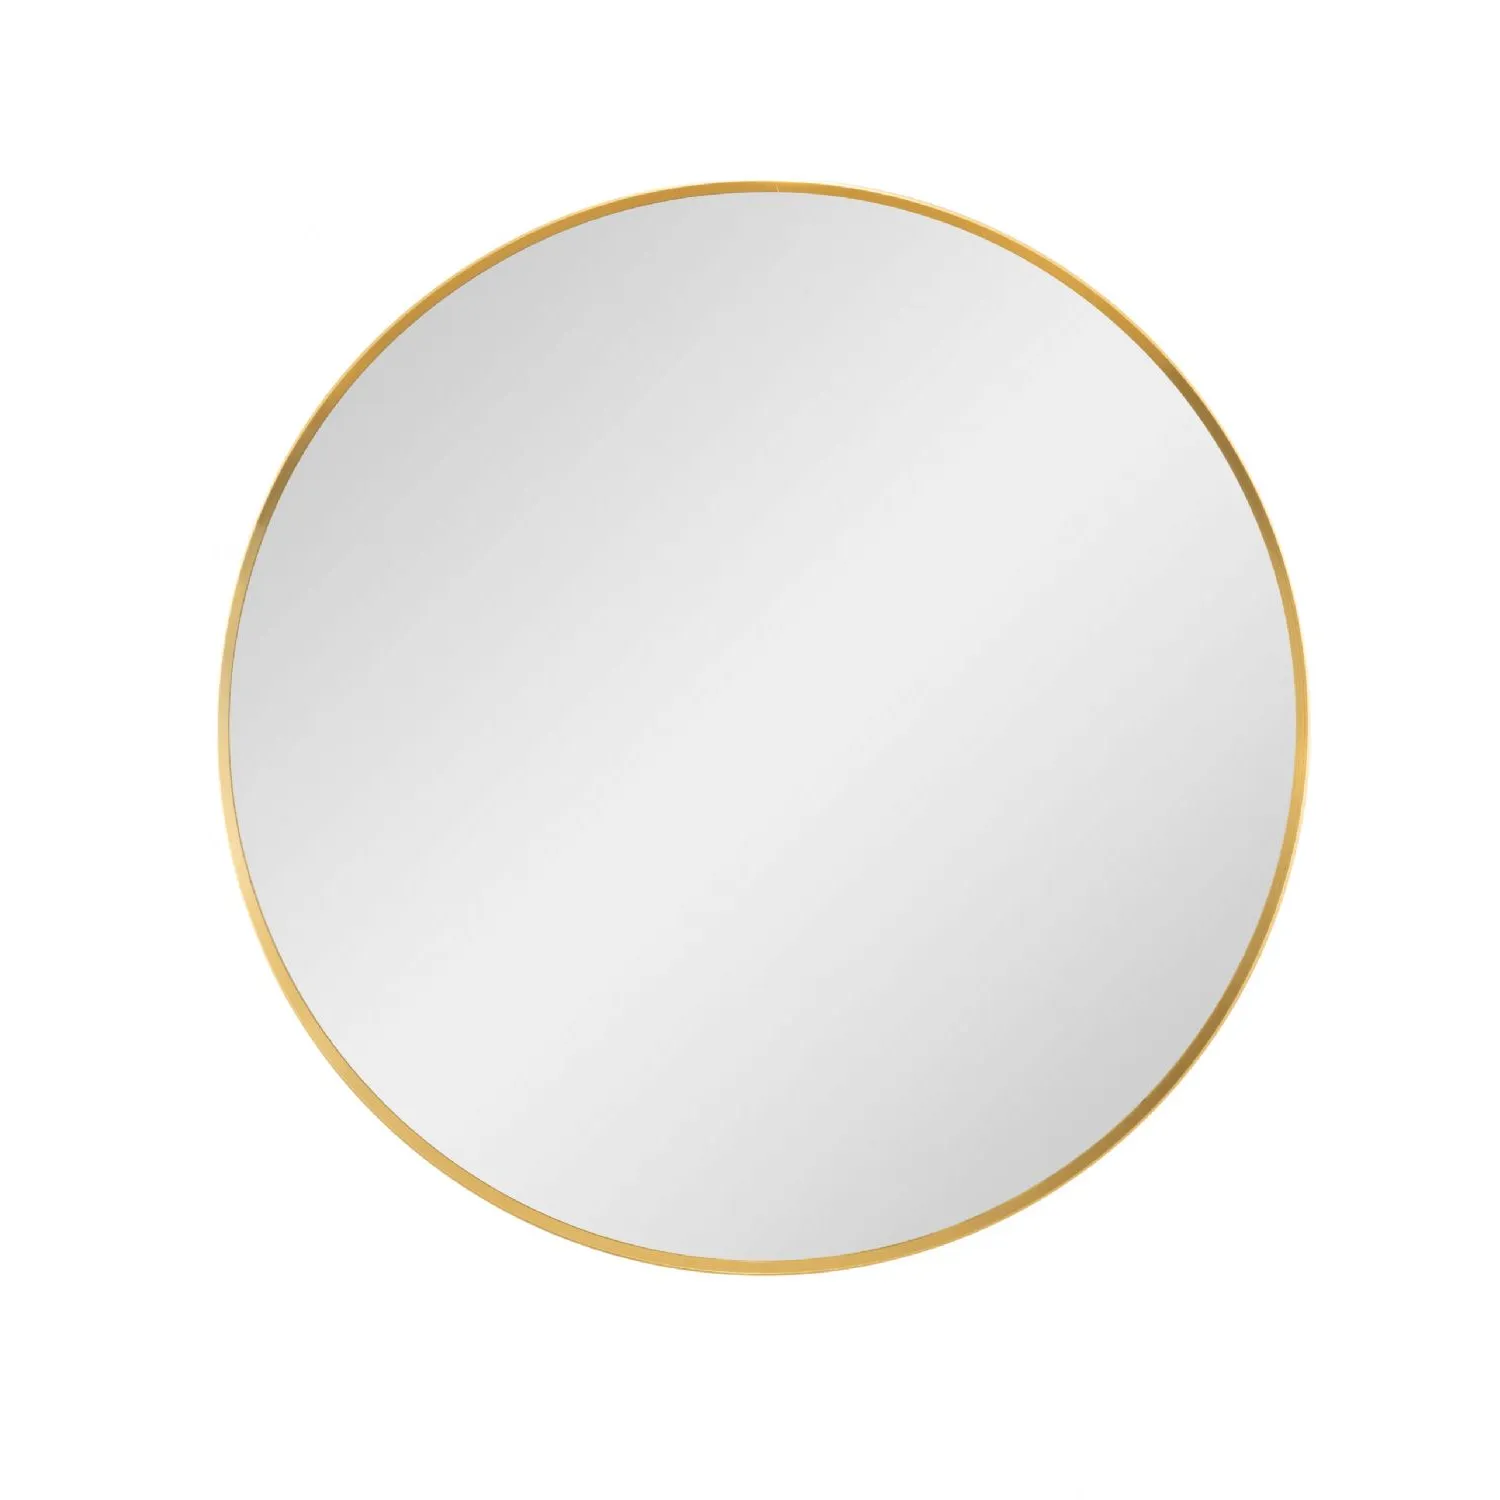 Extra Large Round Gold Metal Flare Framed Broadway Wall Mirror